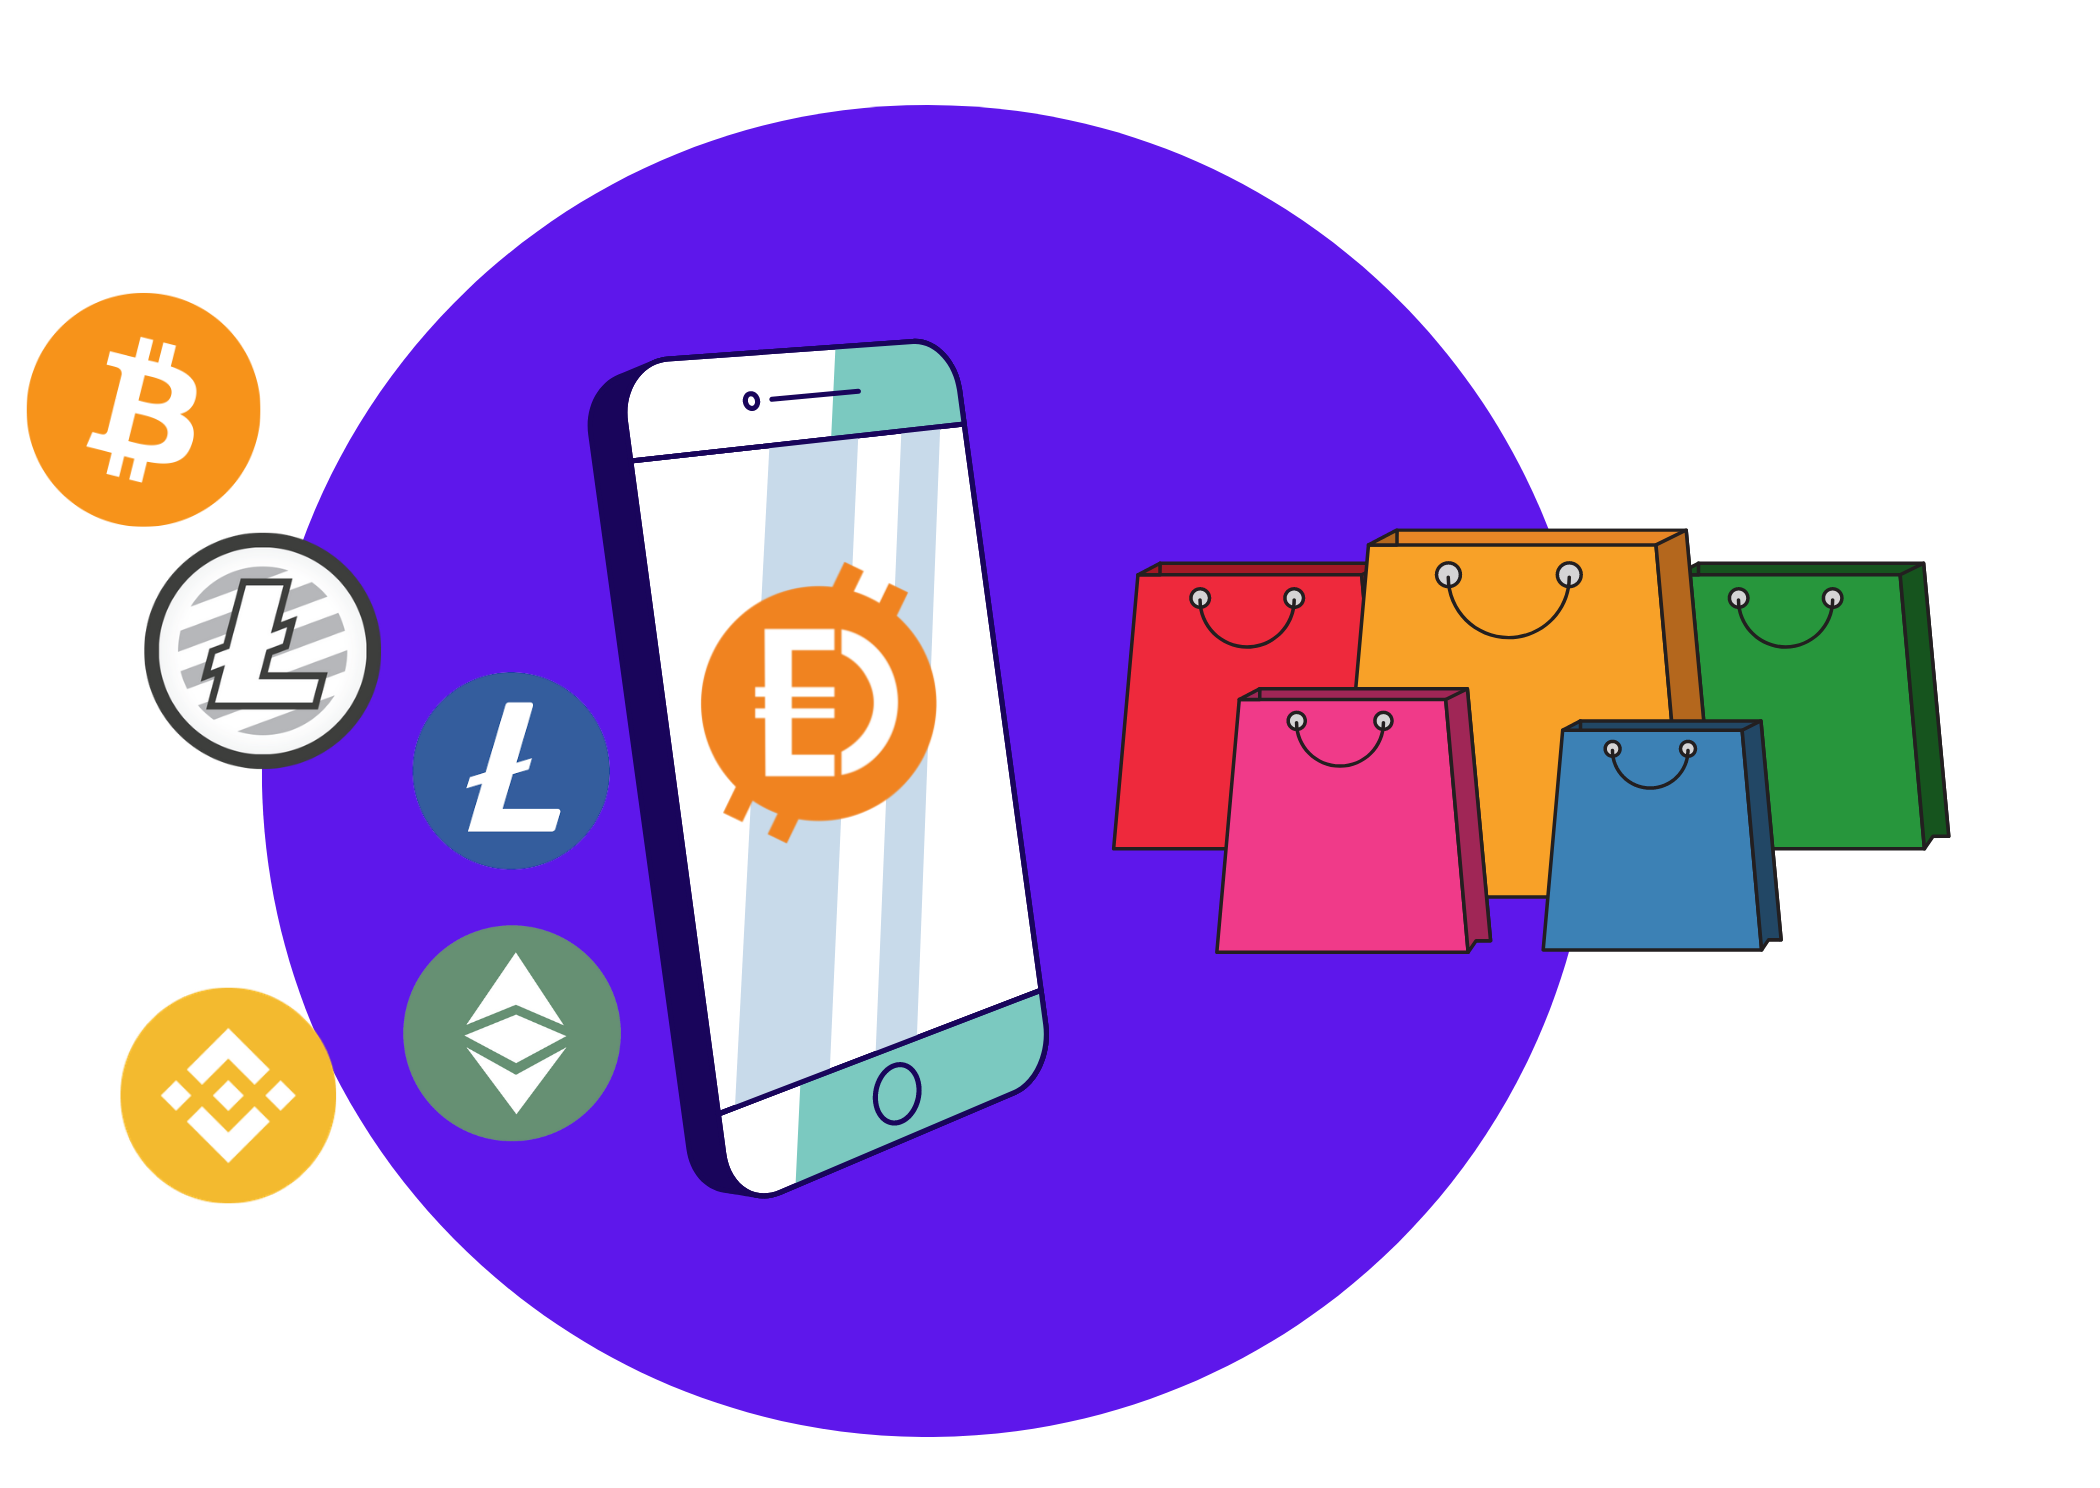 HOW TO CONNECT CRYPTO E-COMMERCE TO YOUR STORE?